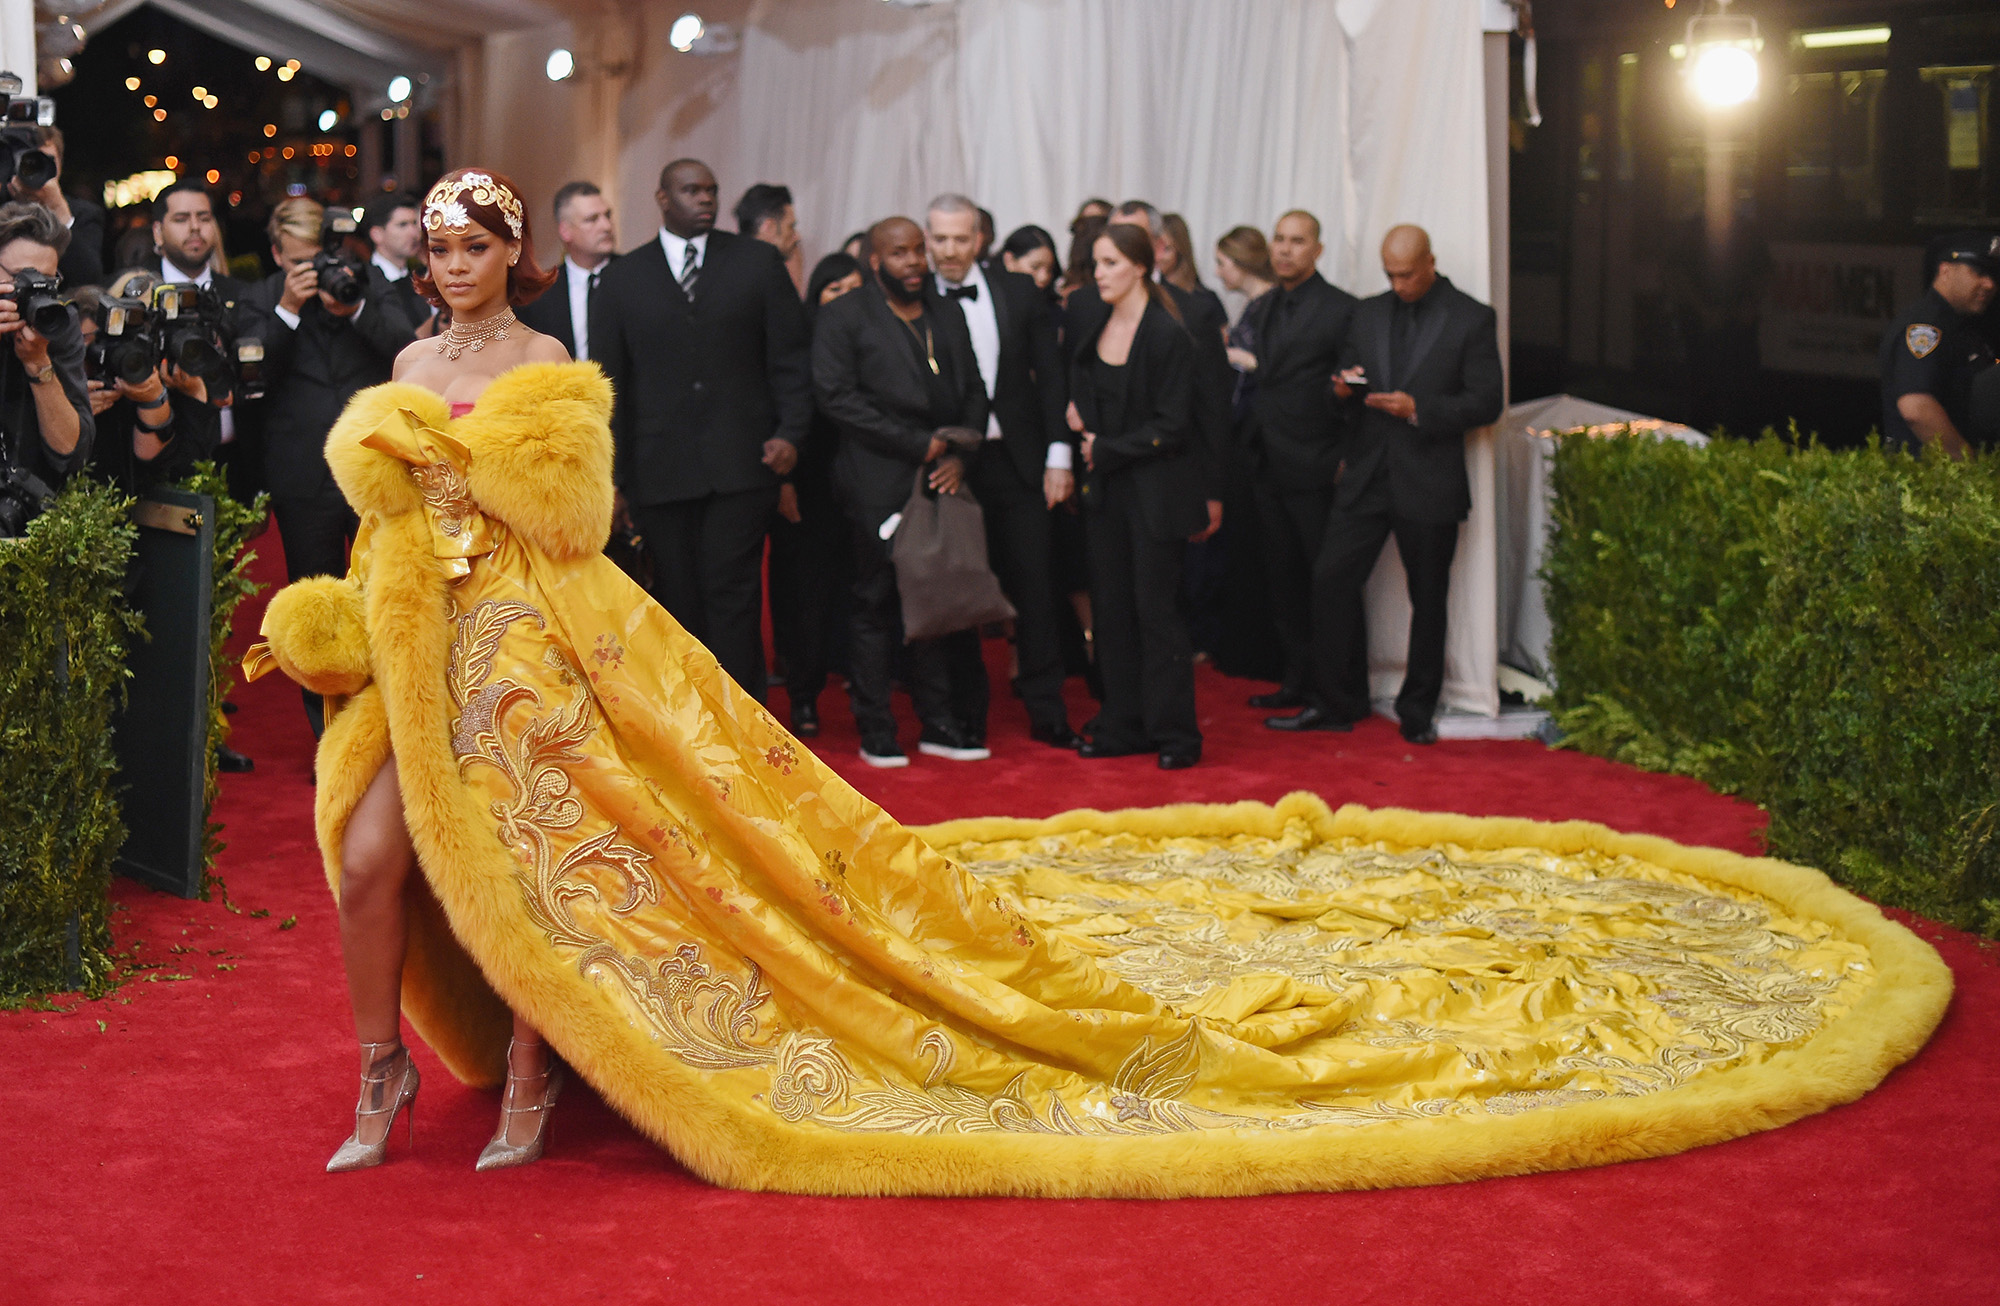 Rihanna To Co-Host 2018 Met Gala With Amal Clooney, Versace | Time